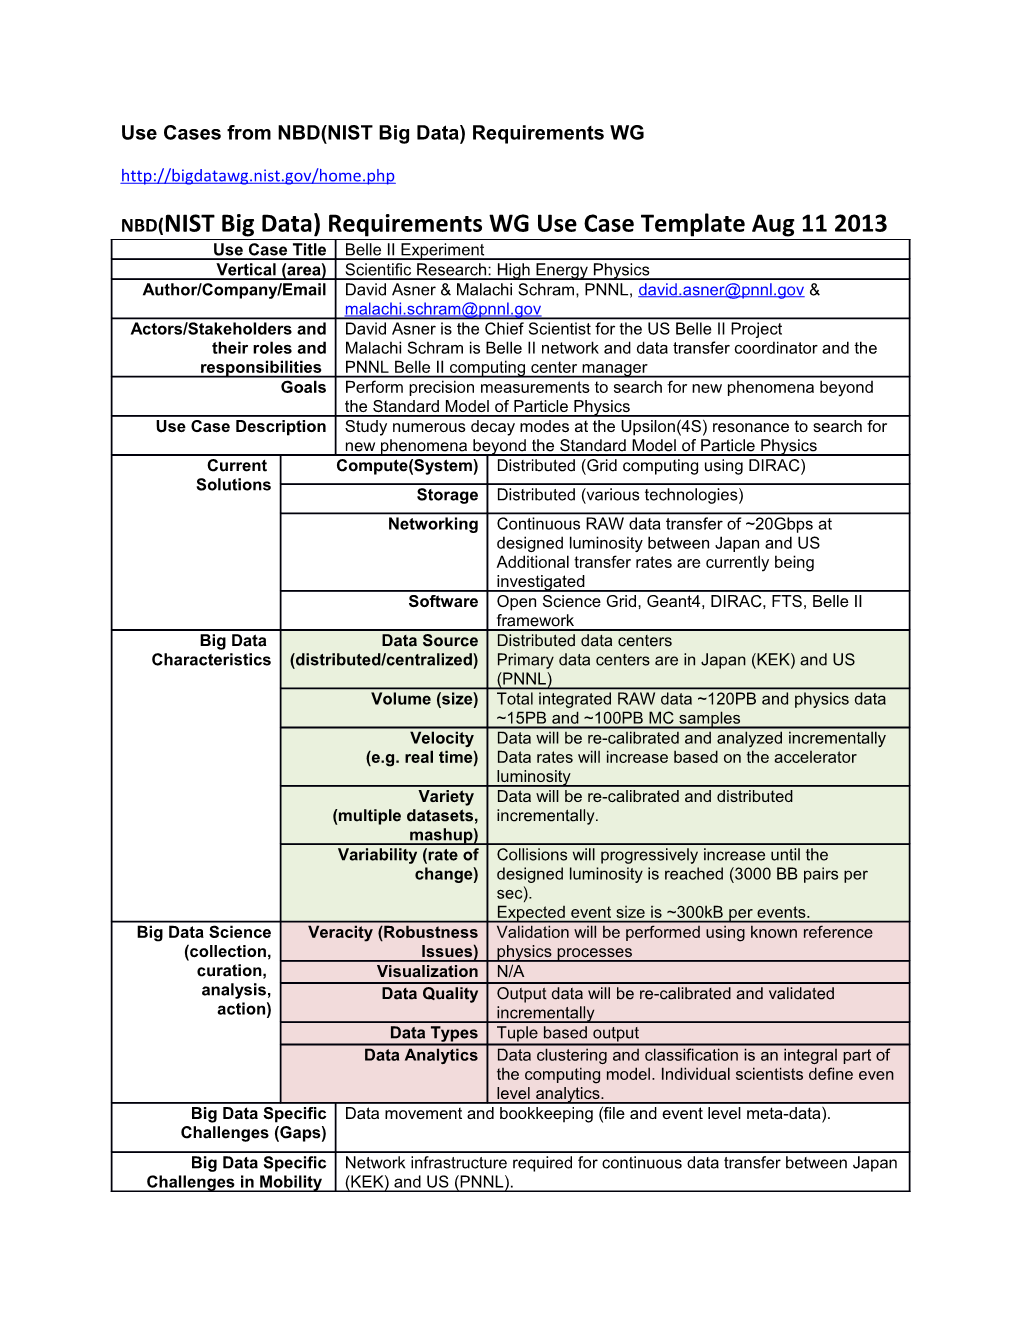 Use Cases from NBD(NIST Big Data) Requirements WG s2